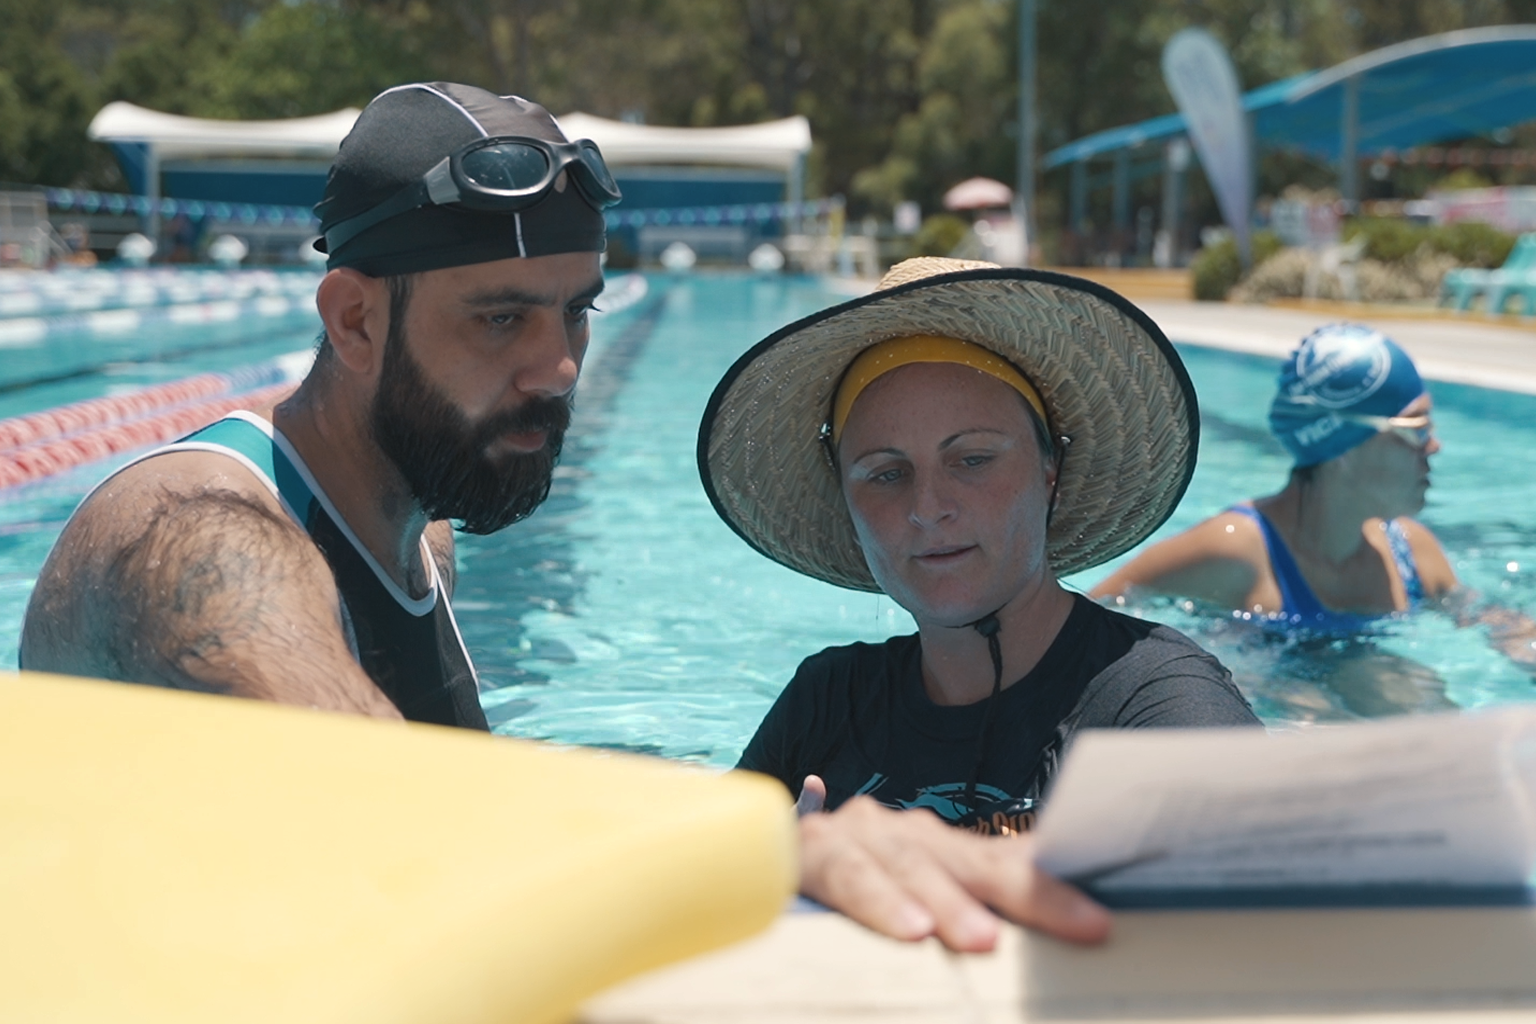 Aqua English Project Co-founder Sarah Scarce in the pool with one of the participants.